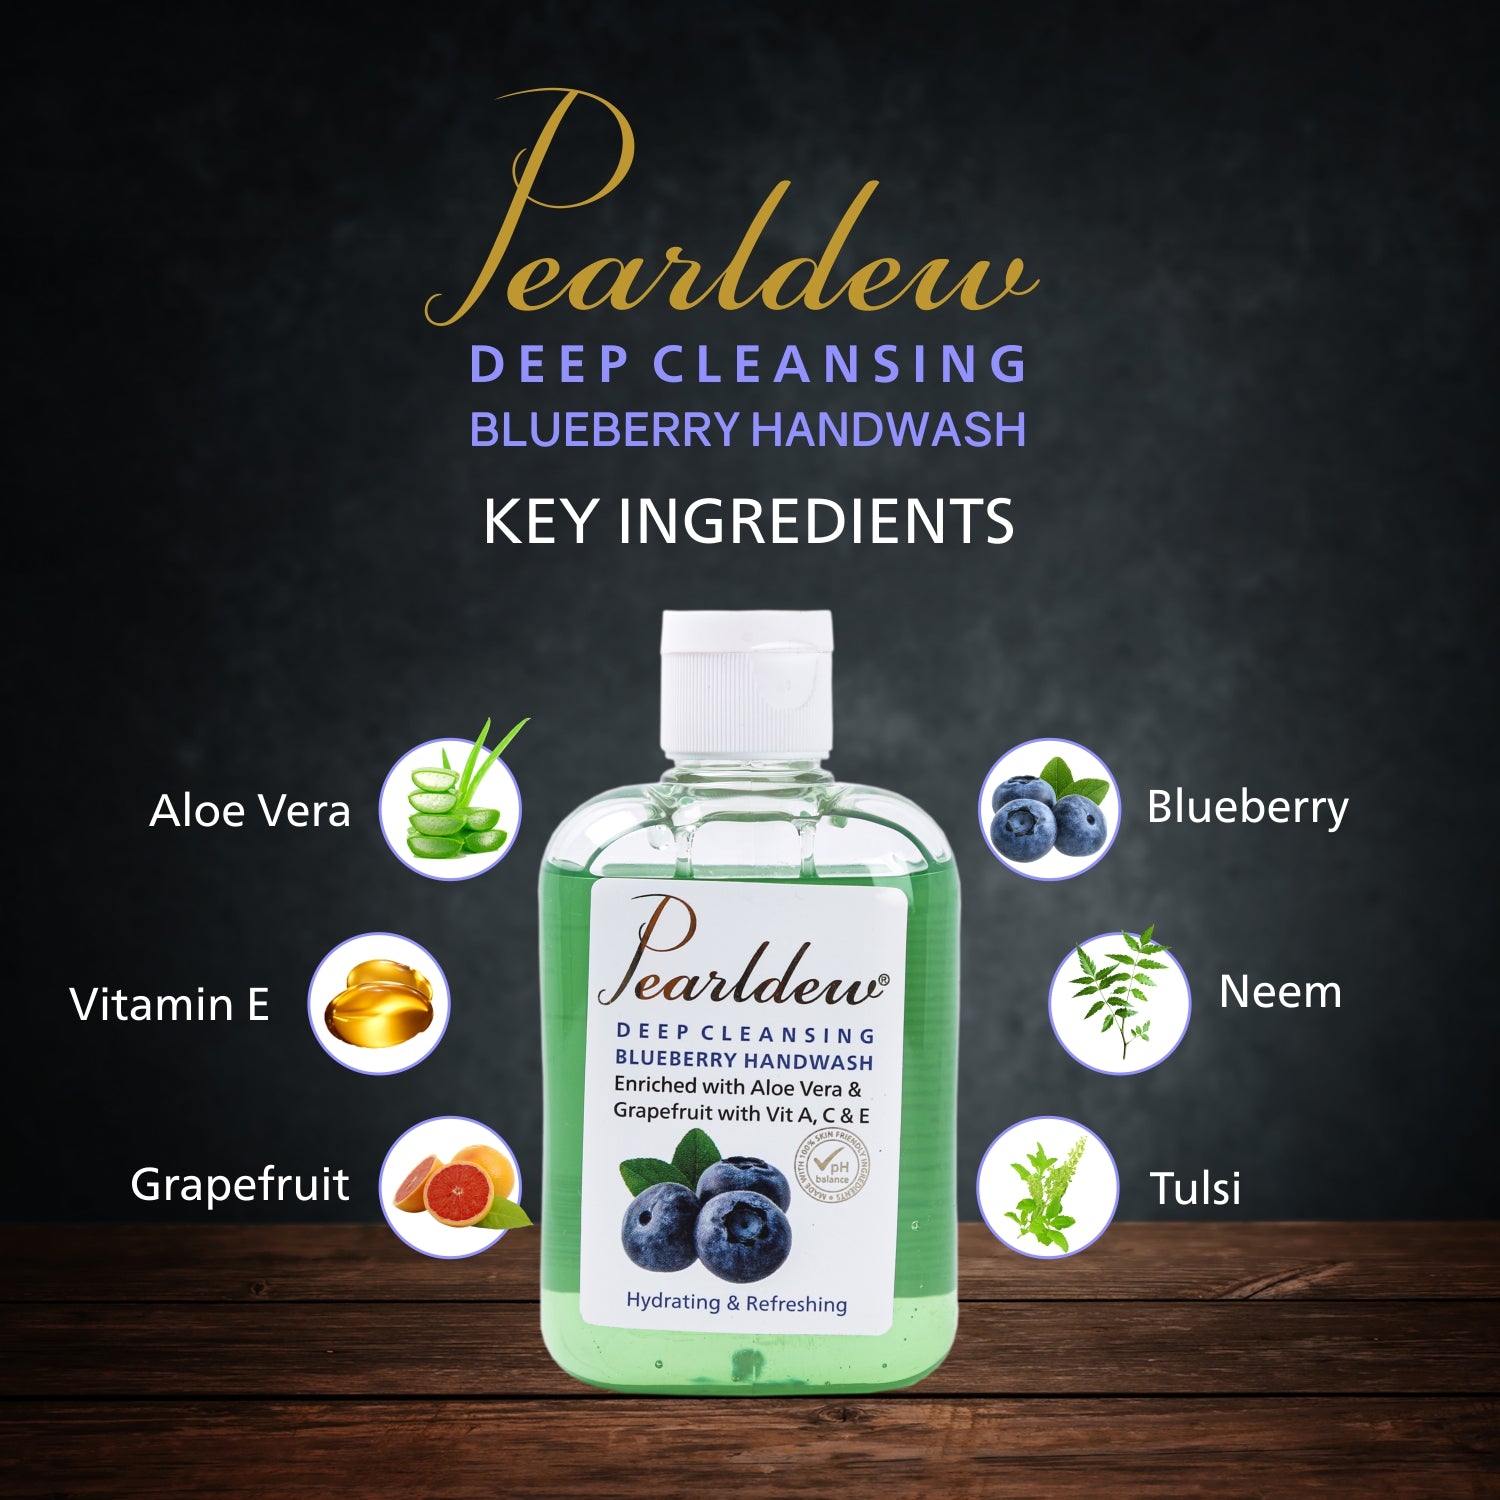 Pearldew Deep Cleansing Blueberry Hand Wash (250 ml)